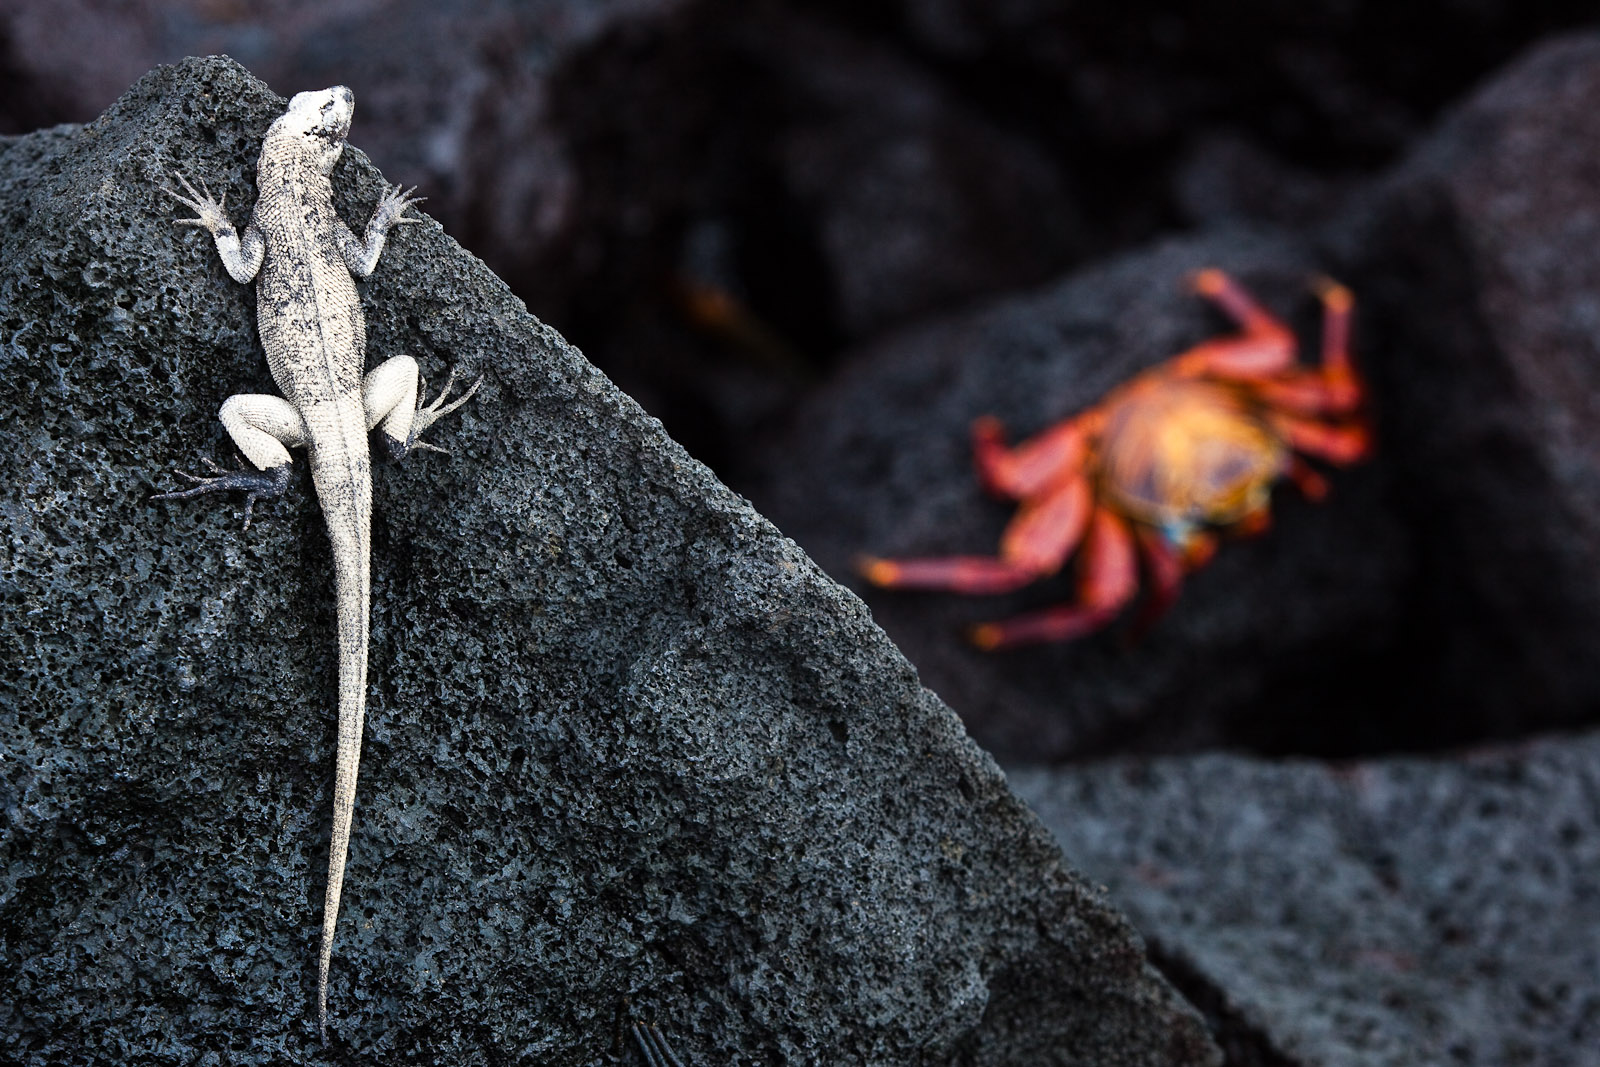 A lava lizard turns white as it gets ready to molt. He's got his eye on a Sally Lightfoot Crab on the lava below him. Photo by Jay Graham